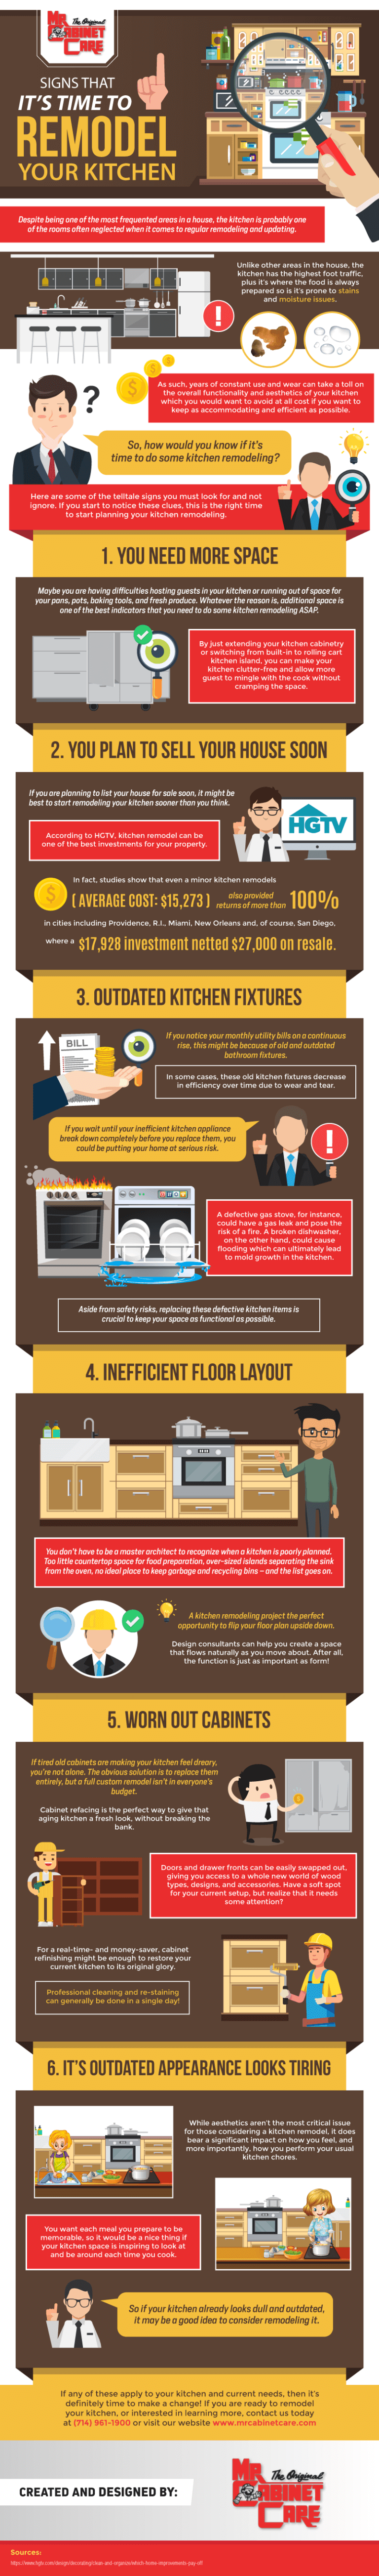 Signs That Its Time to Remodel Your Kitchen